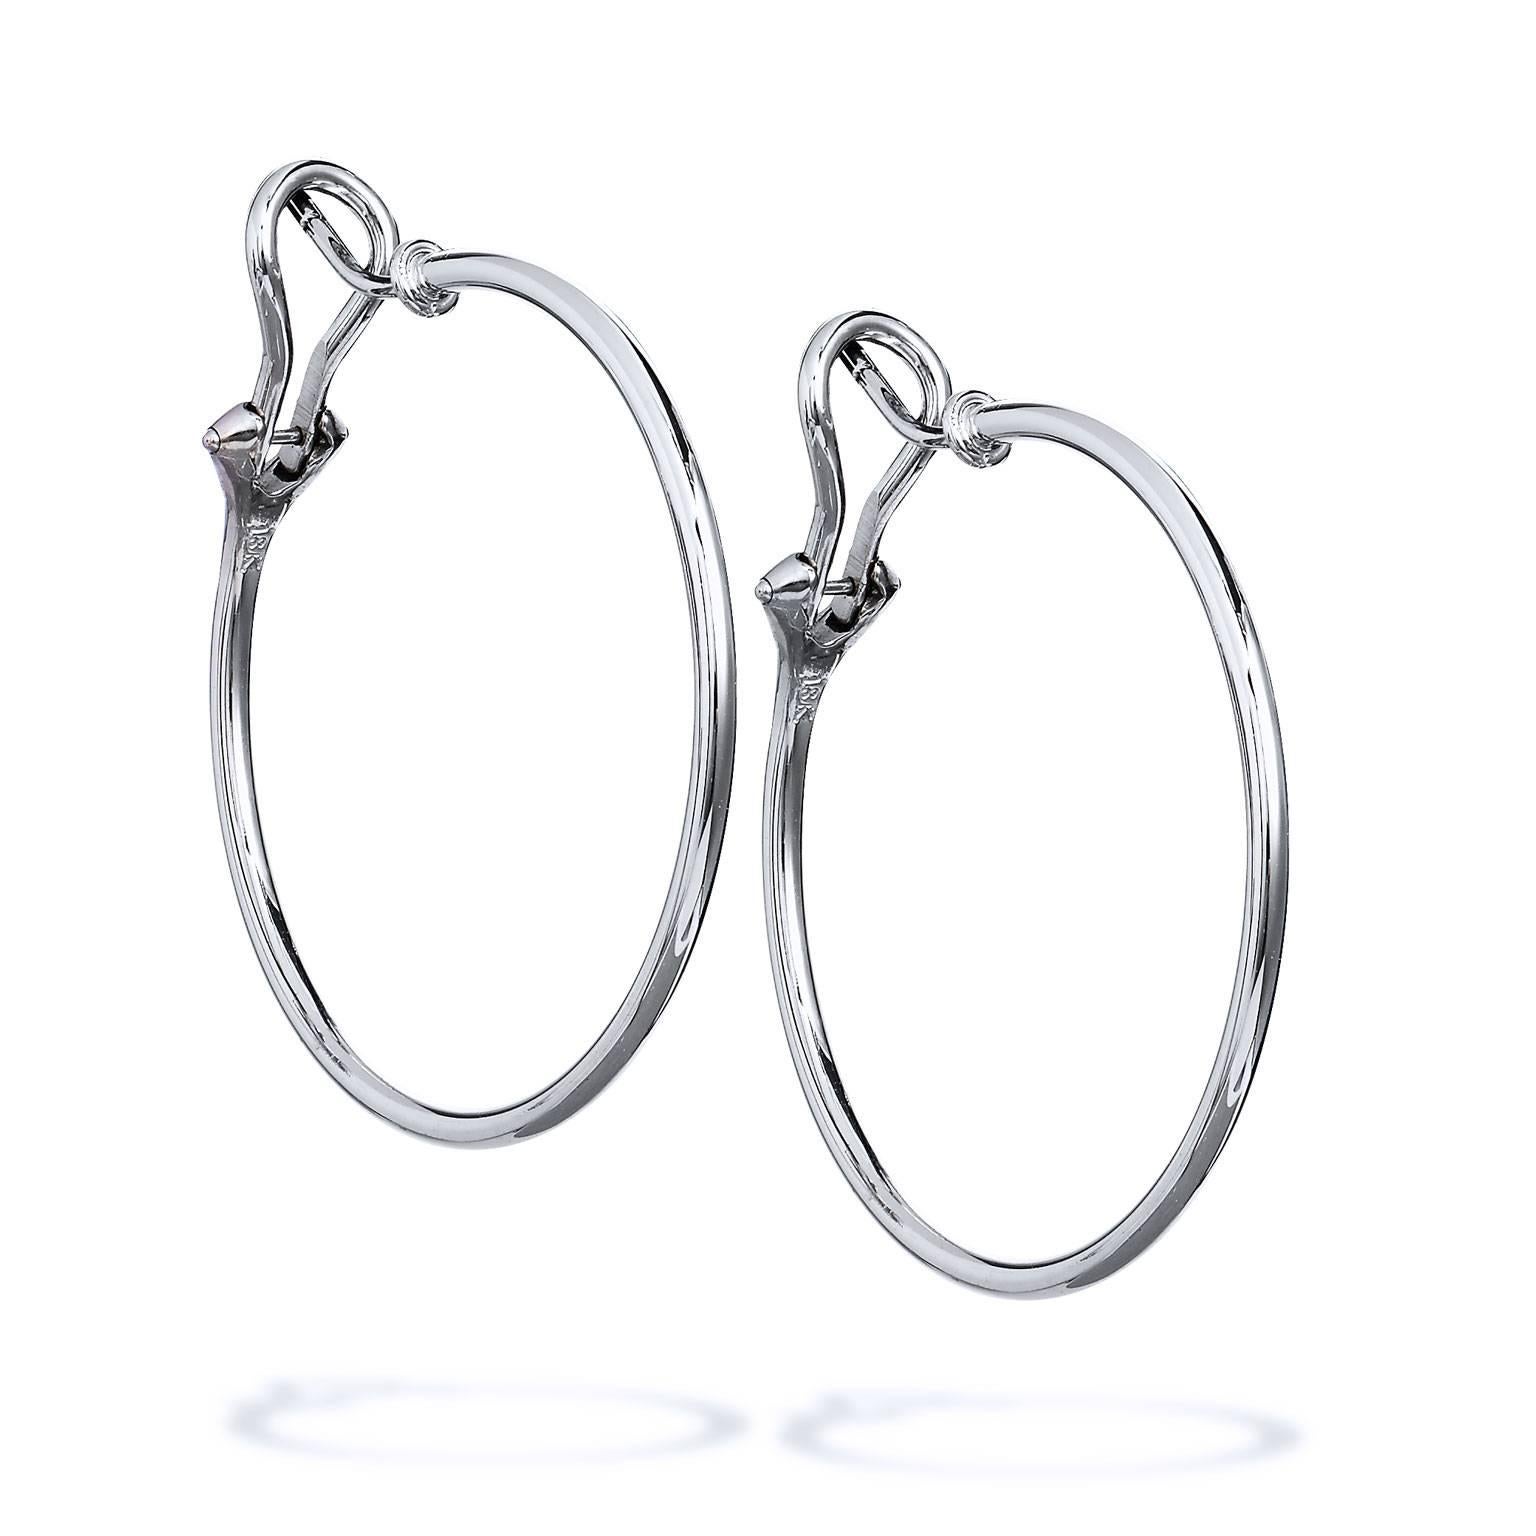 These handmade H and H 18 karat white gold hoop earrings are the casual and chic addition needed in one's wardrobe. Measuring 33 MM in diameter, these earrings are just the right size.